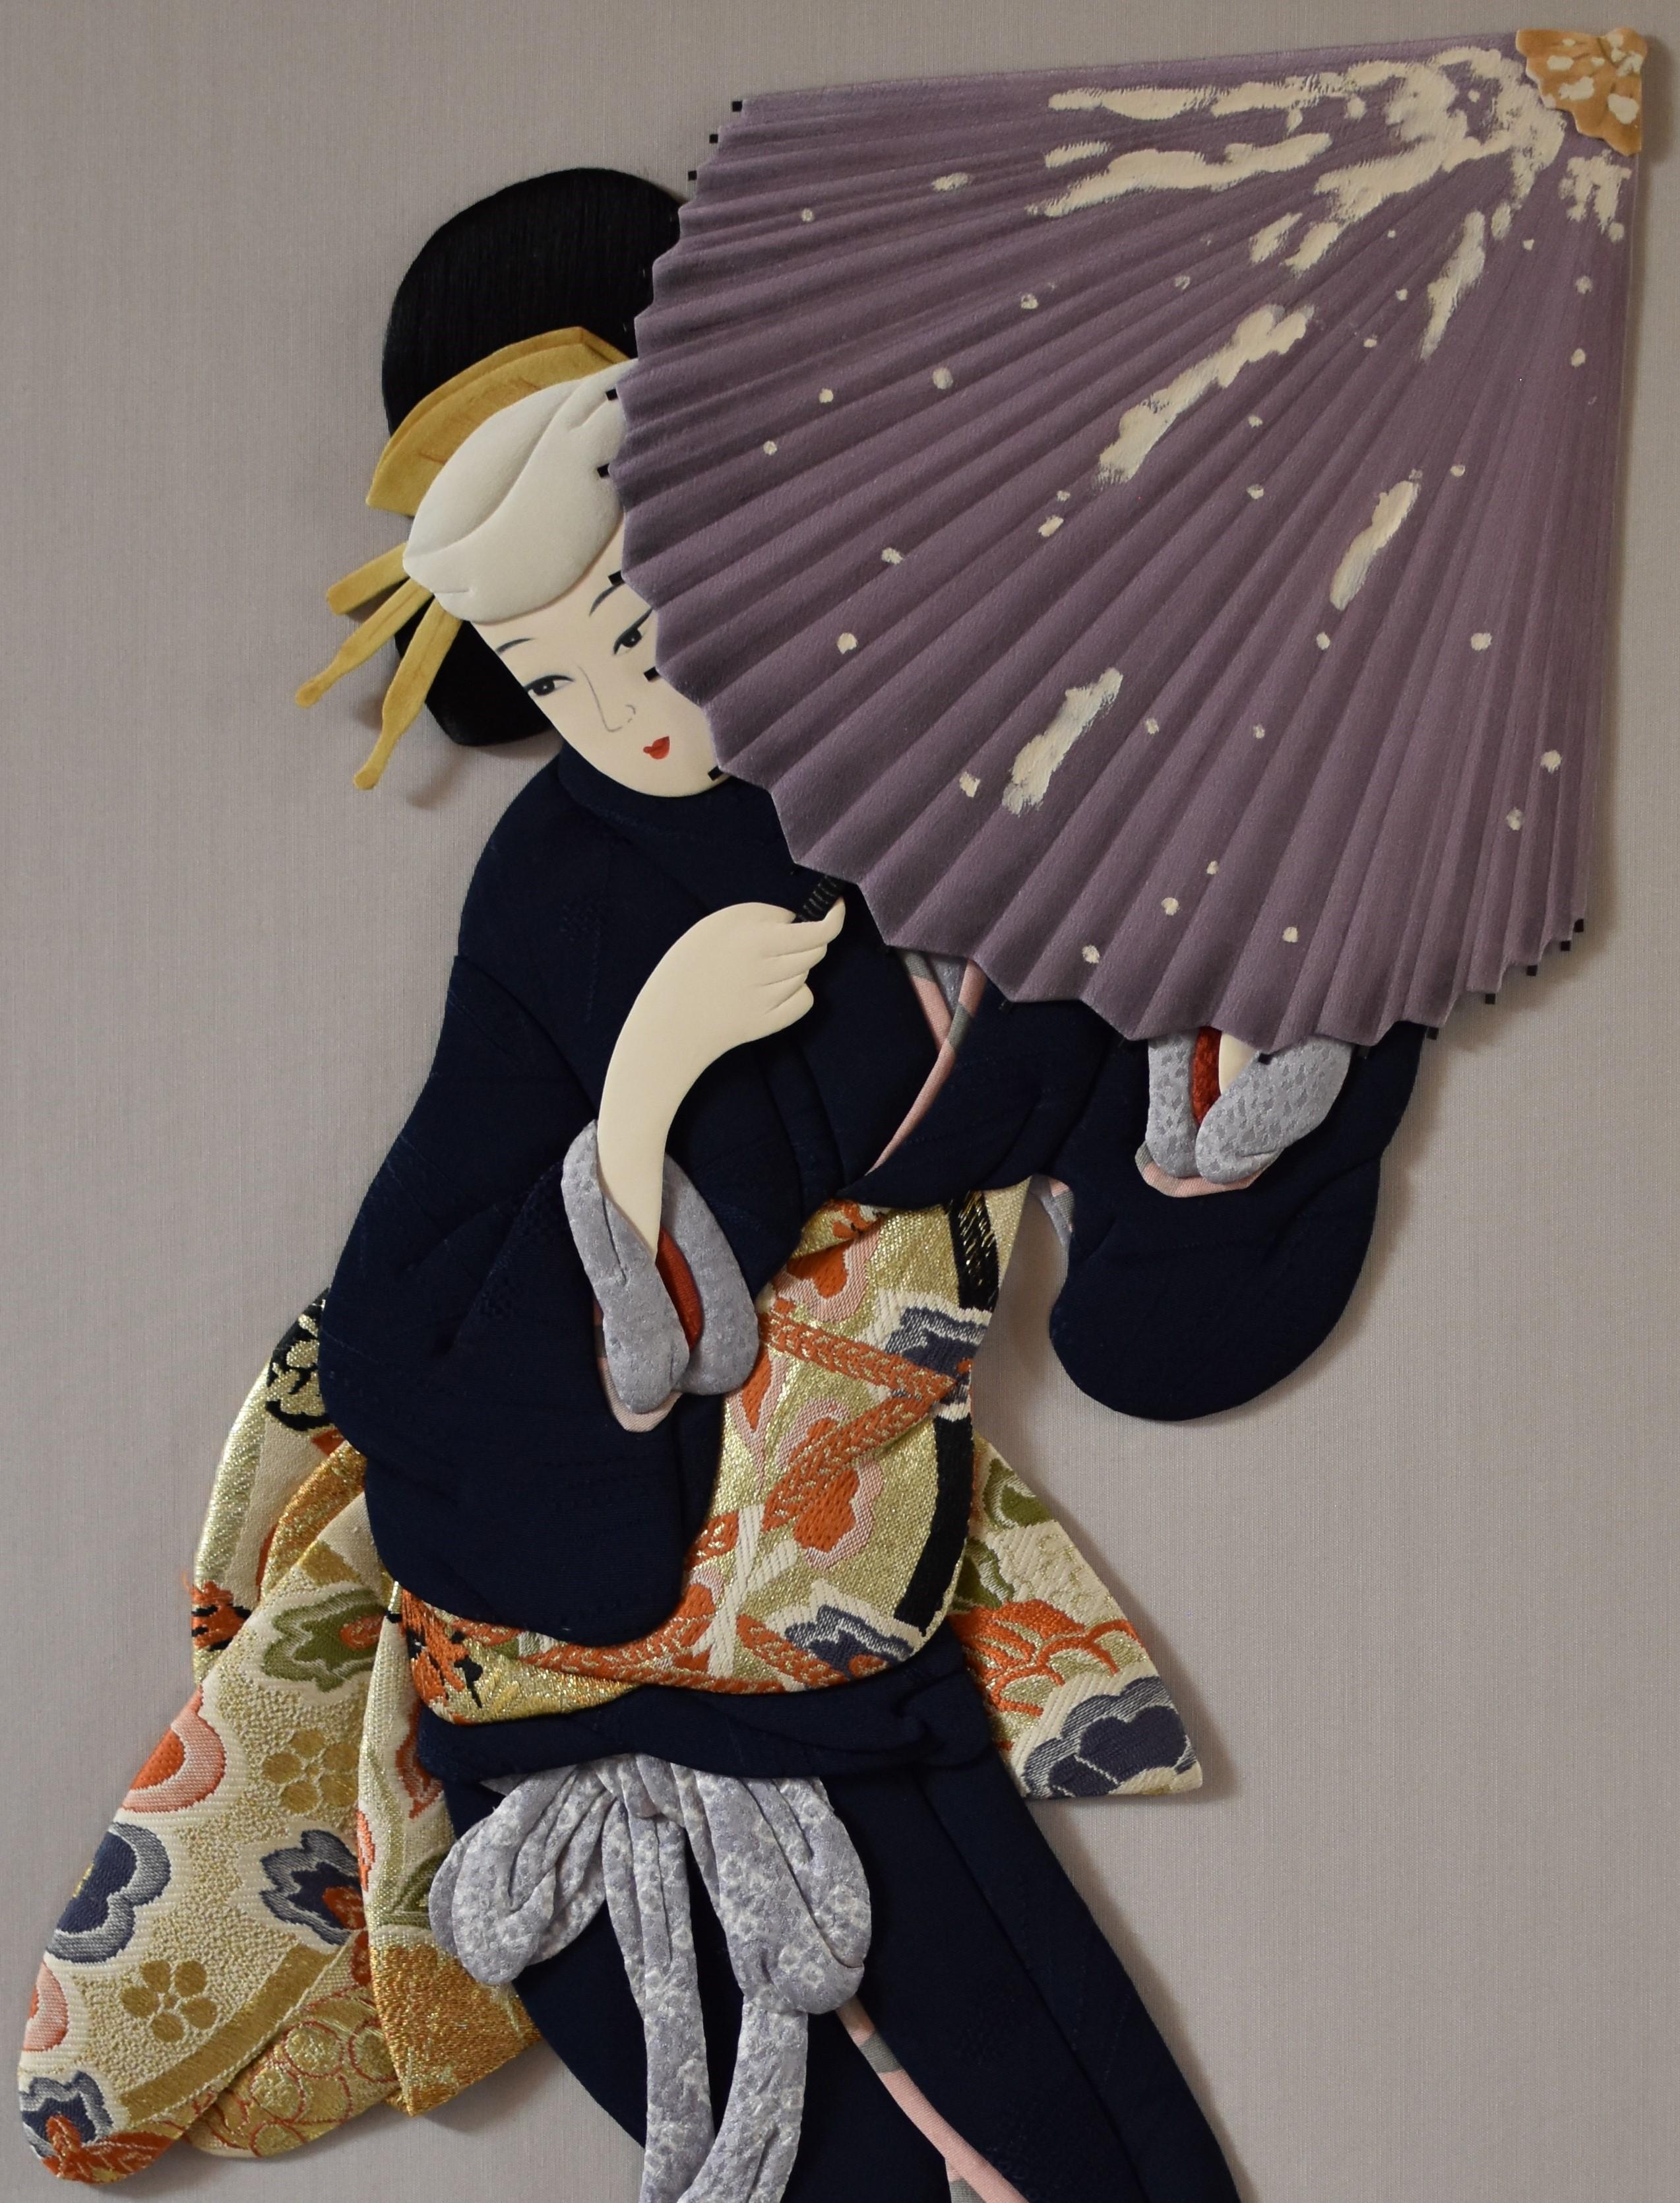 Mesmerizing contemporary Japanese handcrafted traditional Oshie wall decorative art form using high quality kimono silk and brocade fabrics, known as oshie (literally, “pressed pictures”) that goes back to the Edo period (1603-1868). It is said this